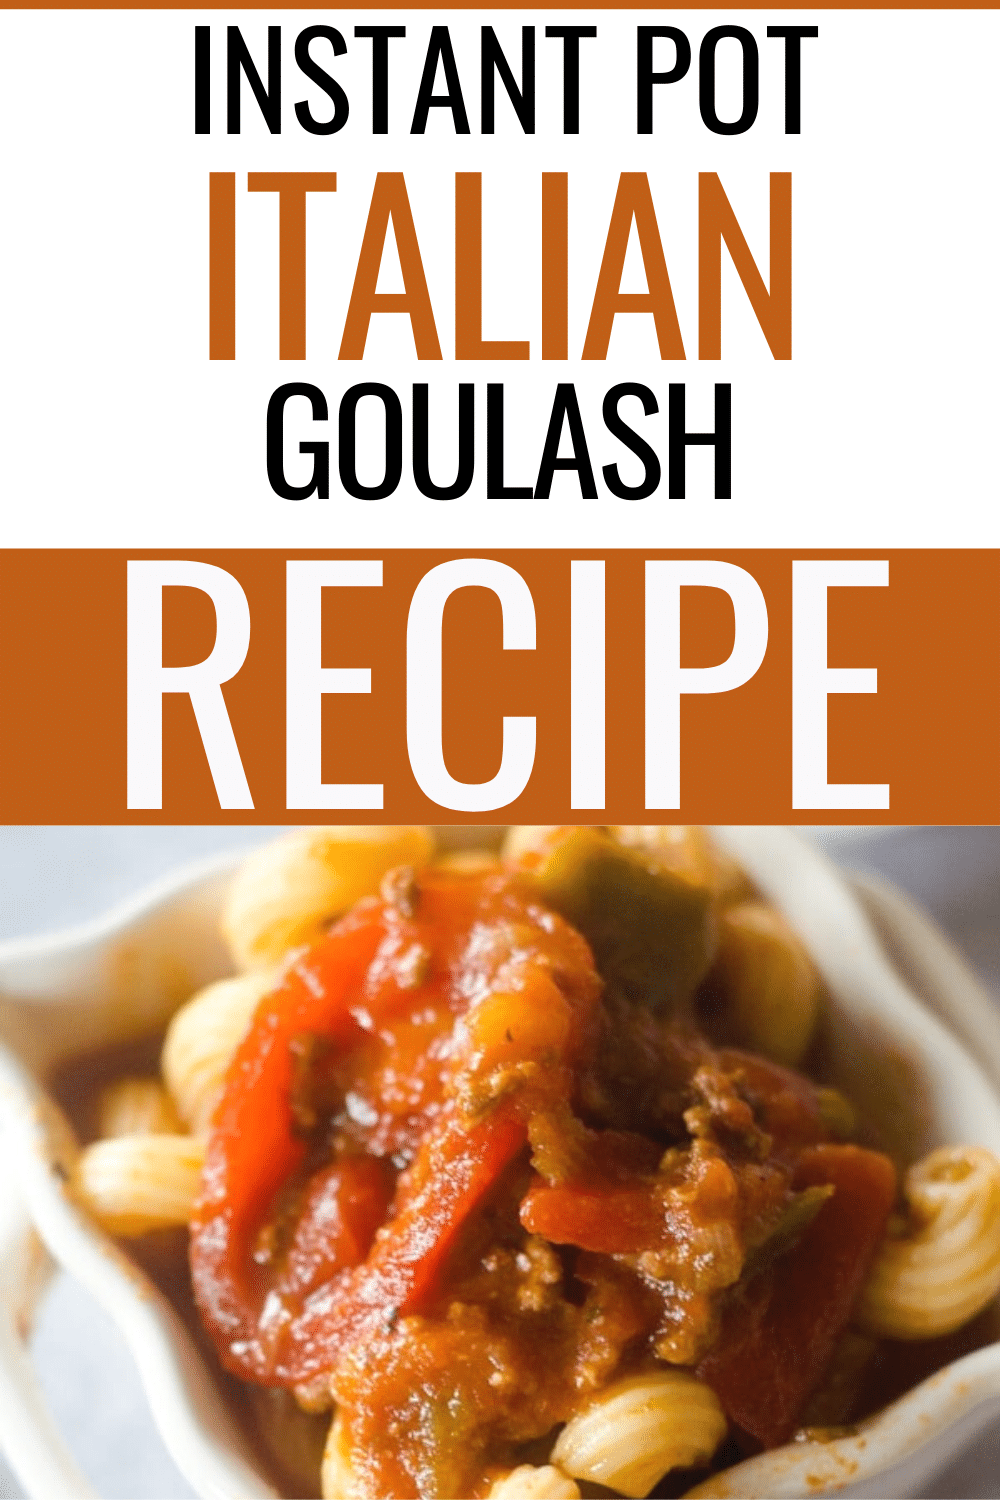 This Instant Pot Italian Goulash is so easy and everyone in the family loves it! #instantpotrecipes #easydinner #goulash #pressurecooker via @wondermomwannab